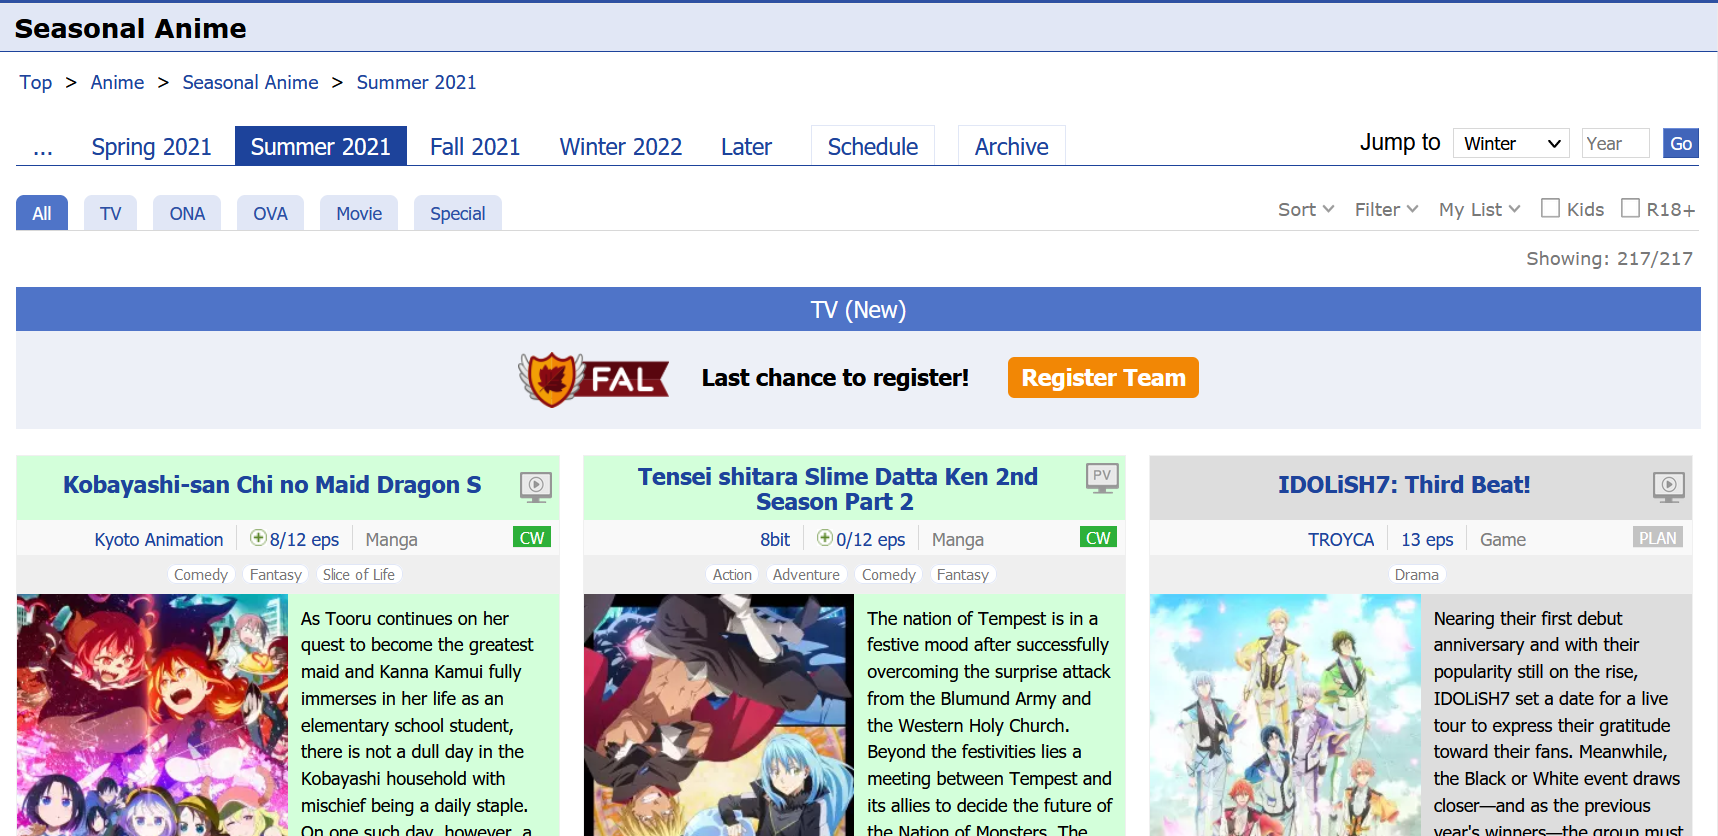 This is how to search for anime like going to myanimelist quickly with